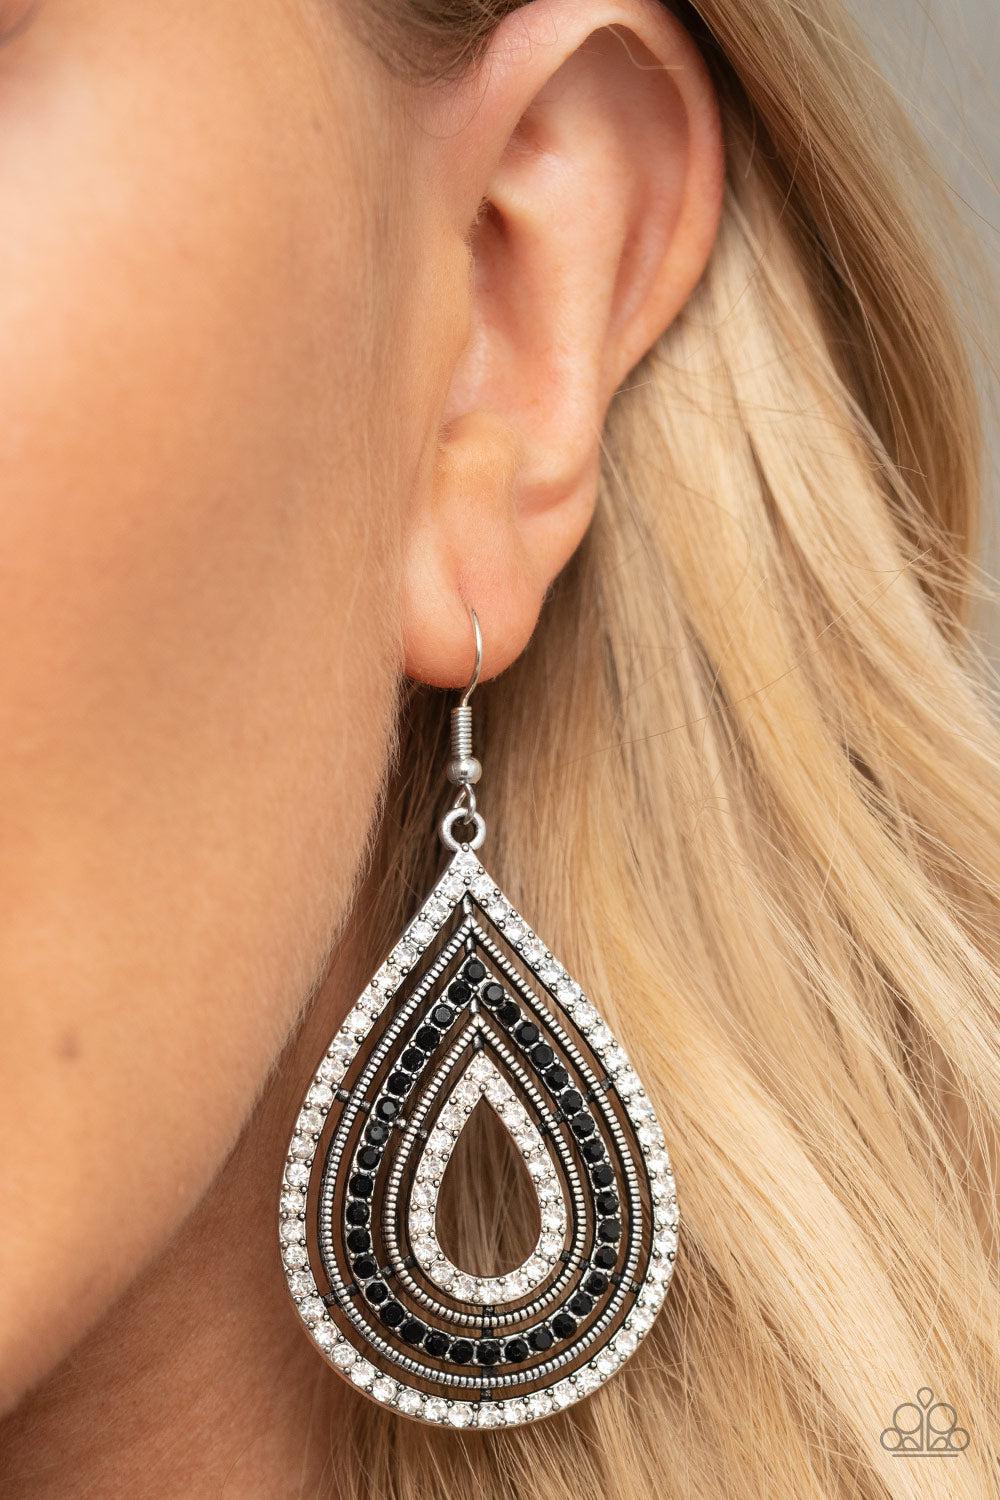 5th Avenue Attraction Black &amp; White Rhinestone Earrings - Paparazzi Accessories-on model - CarasShop.com - $5 Jewelry by Cara Jewels